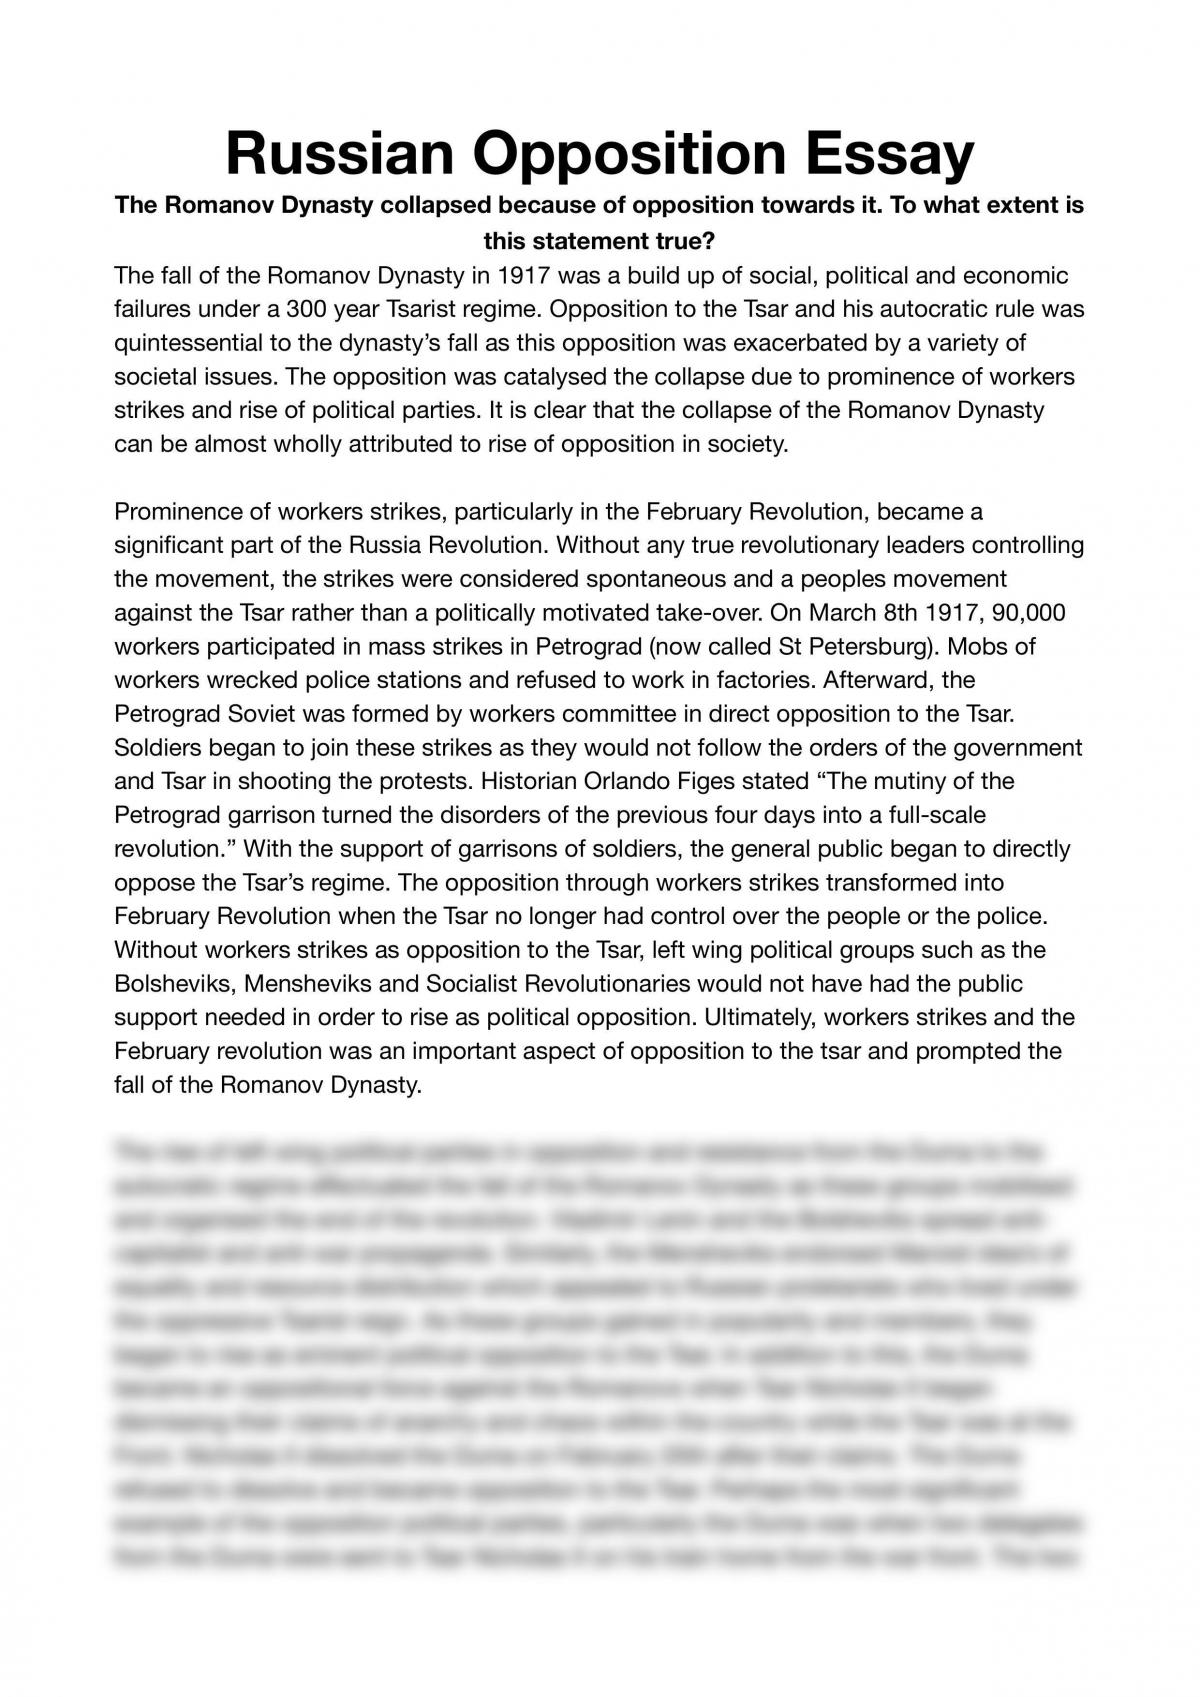 Preliminary Modern History - Russian Opposition Mini Essay - Page 1